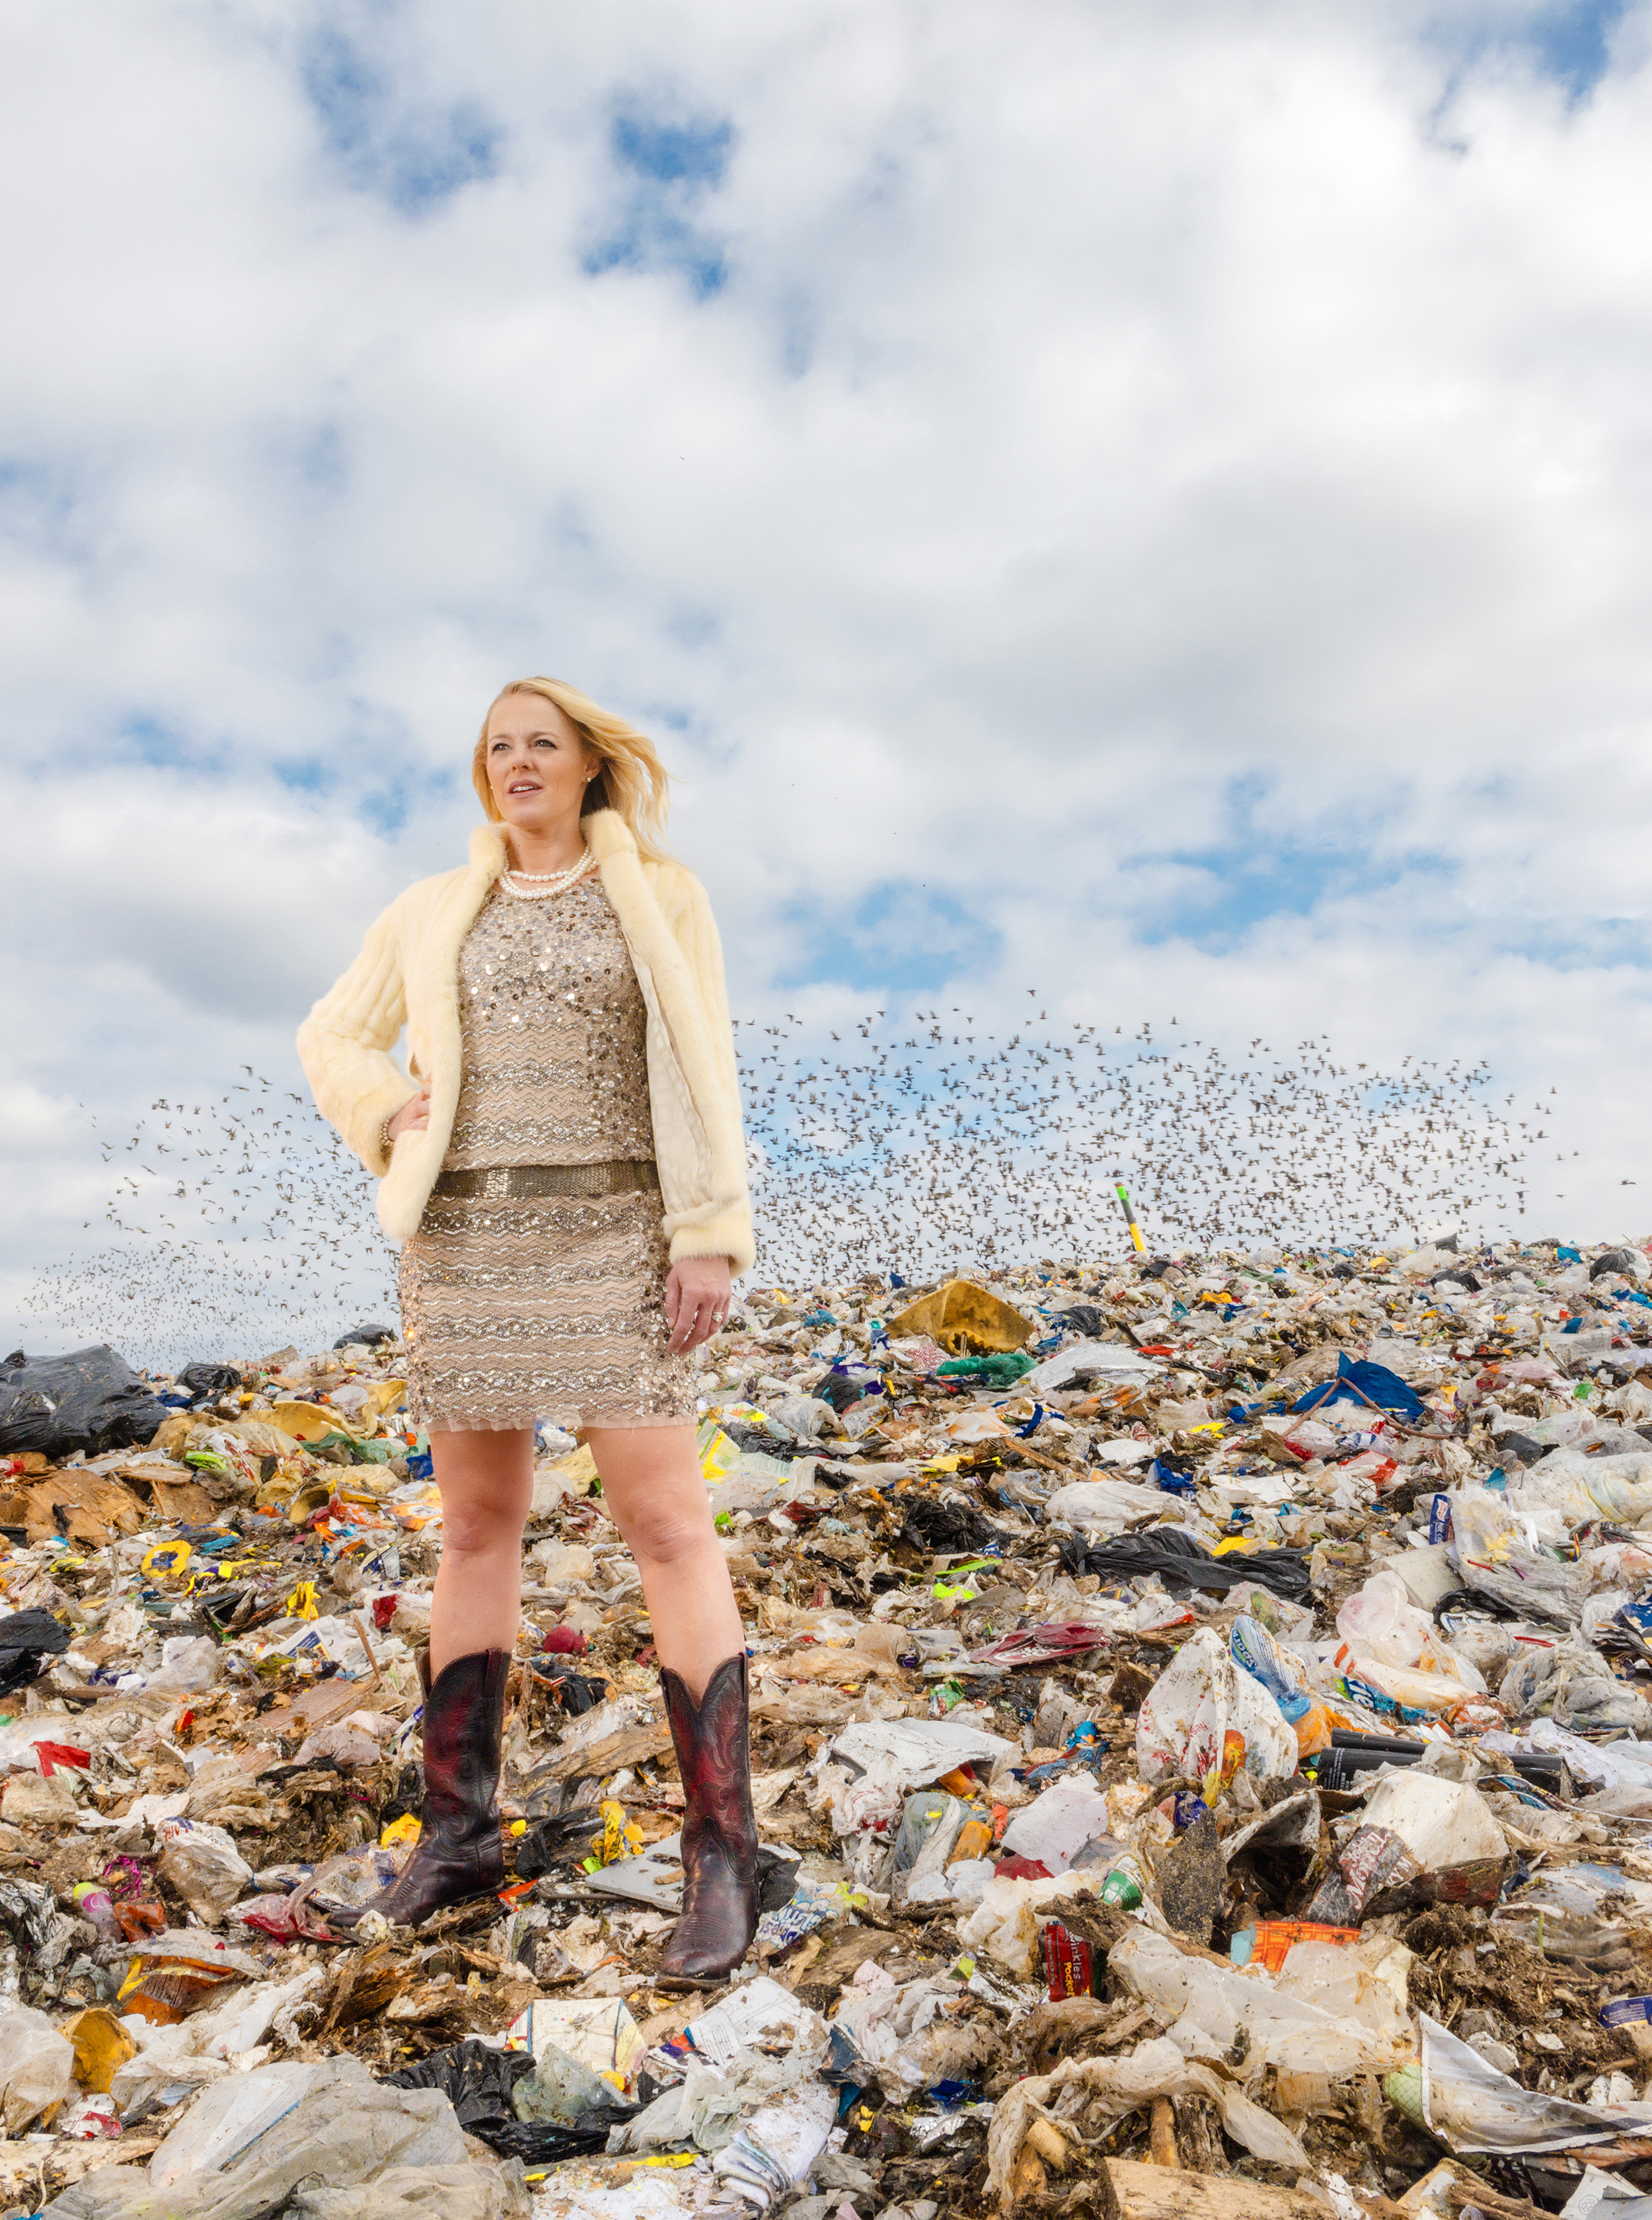  Jenny Grumbles stands in the McCommas Bluff Landfill in Dallas, TX.  Grumbles’ trash-to-treasure entrepreneurship lead to the 11-year tenure of Uptown Country Home, a home furnishings store whose inventory included repaired and repurposed cast-offs 